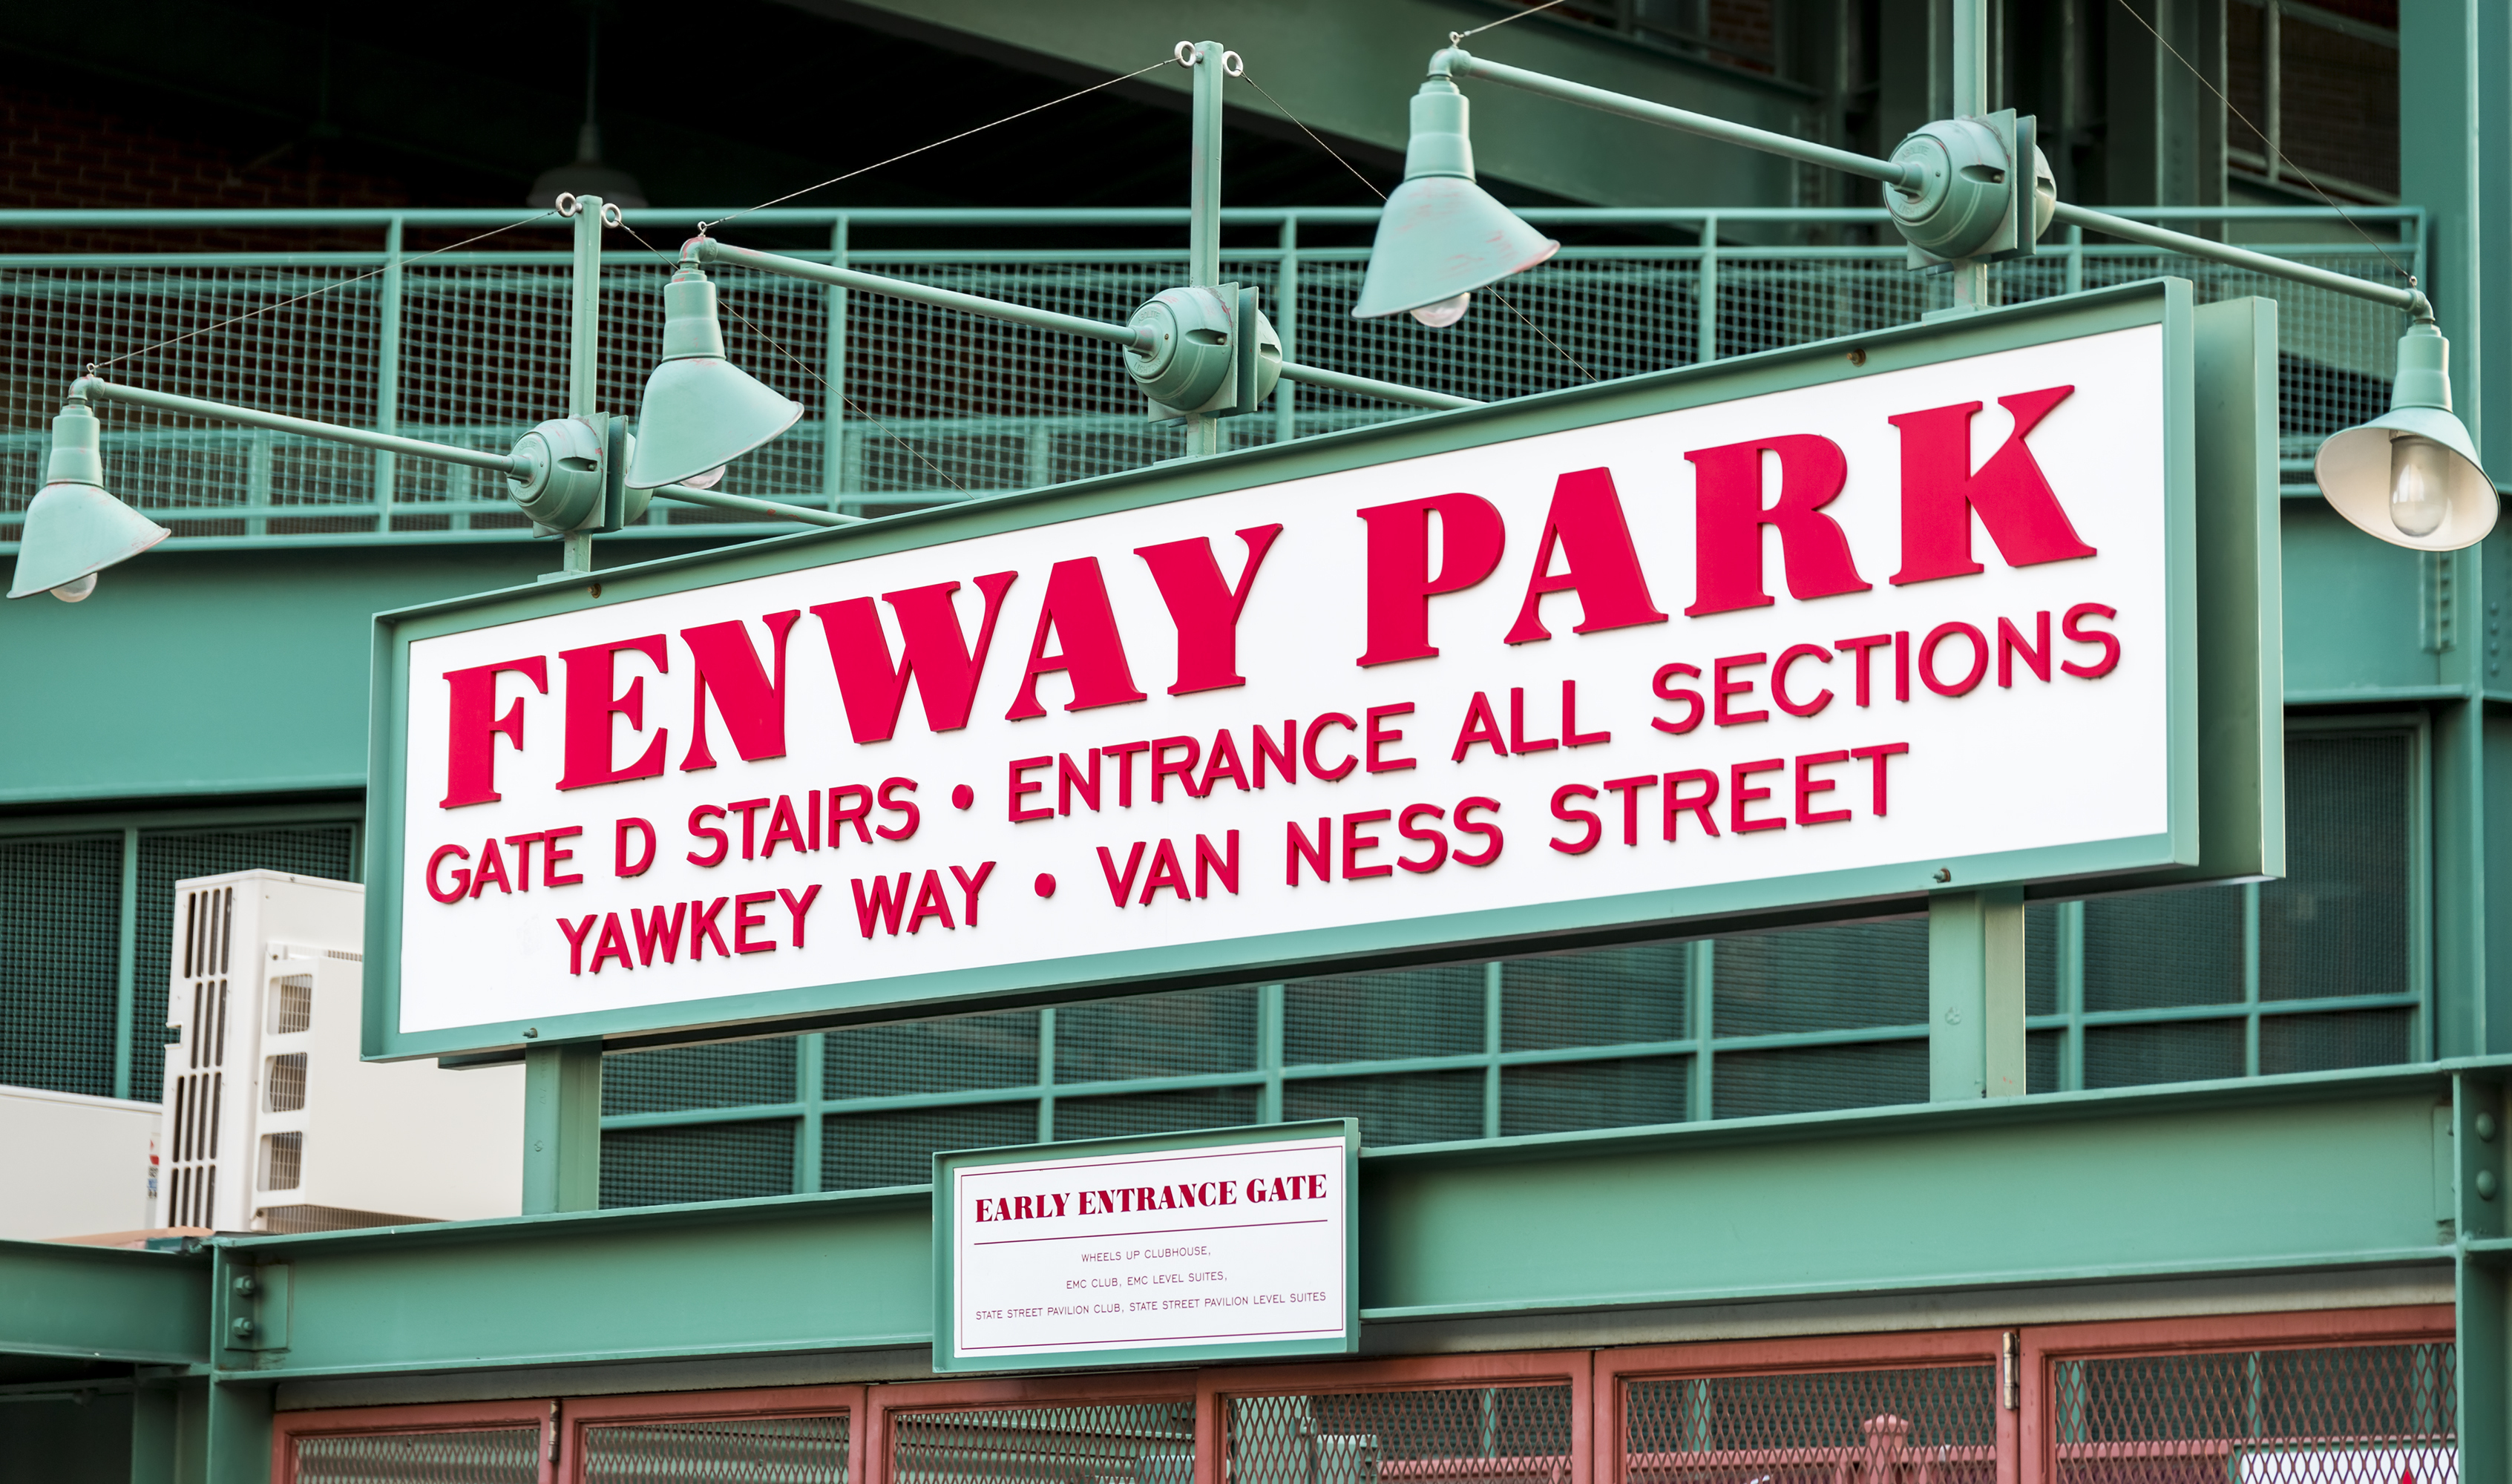 image of Fenway Park early access entrance